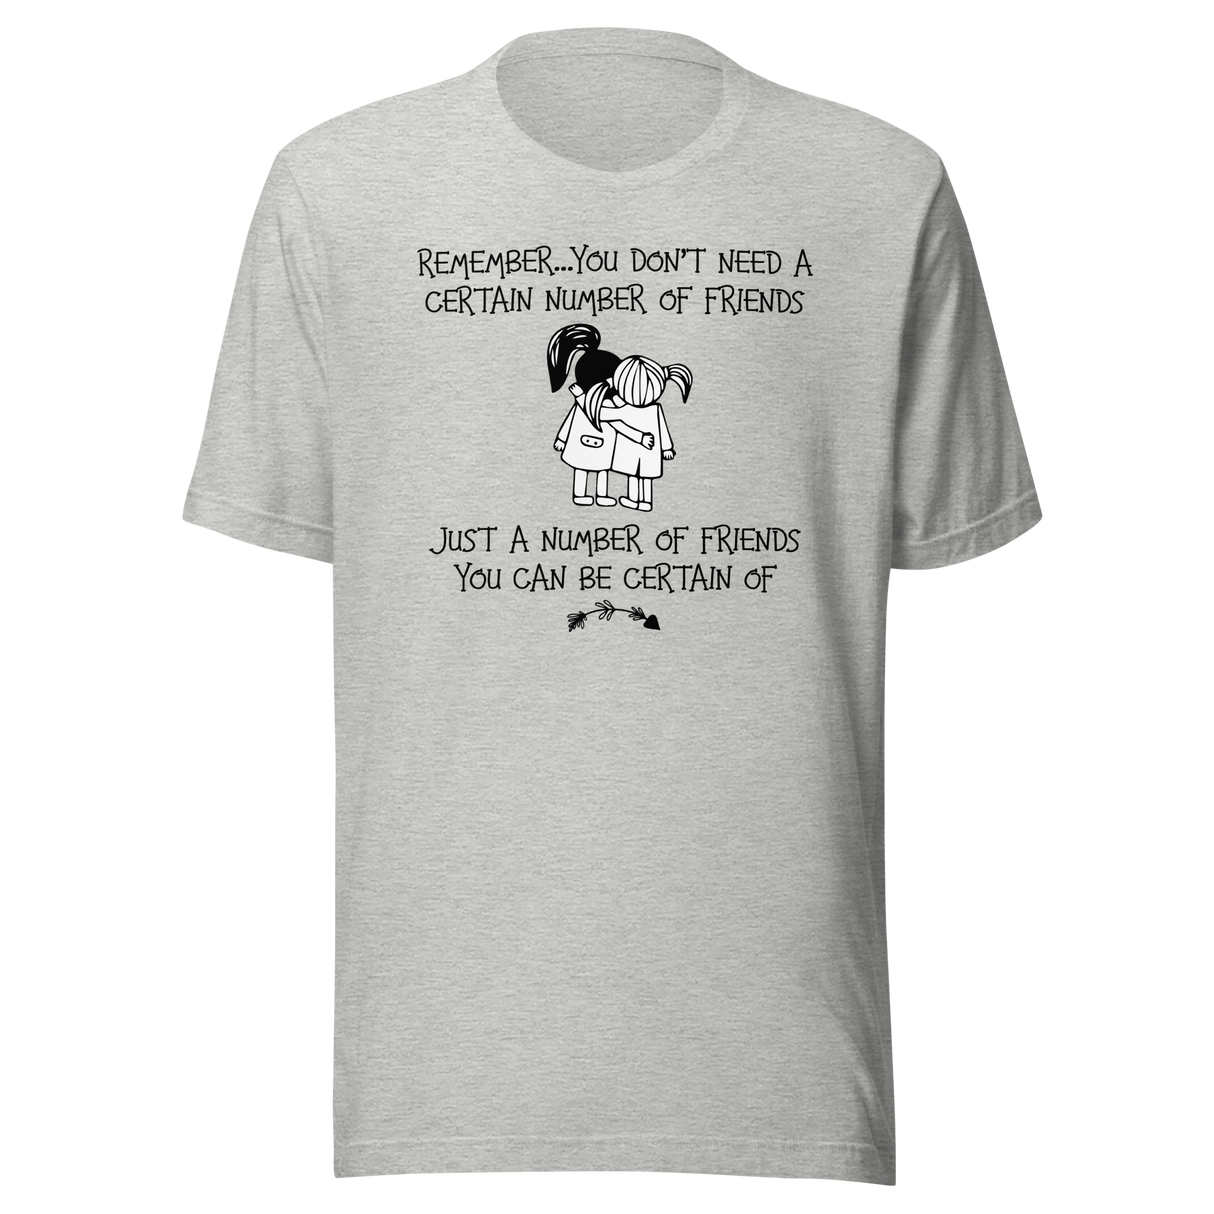 remember-you-dont-need-a-certain-number-of-friends-just-a-number-of-friends-you-can-be-certain-of-life-tee-motivational-t-shirt-life-tee-friendship-t-shirt-empowerment-tee#color_athletic-heather